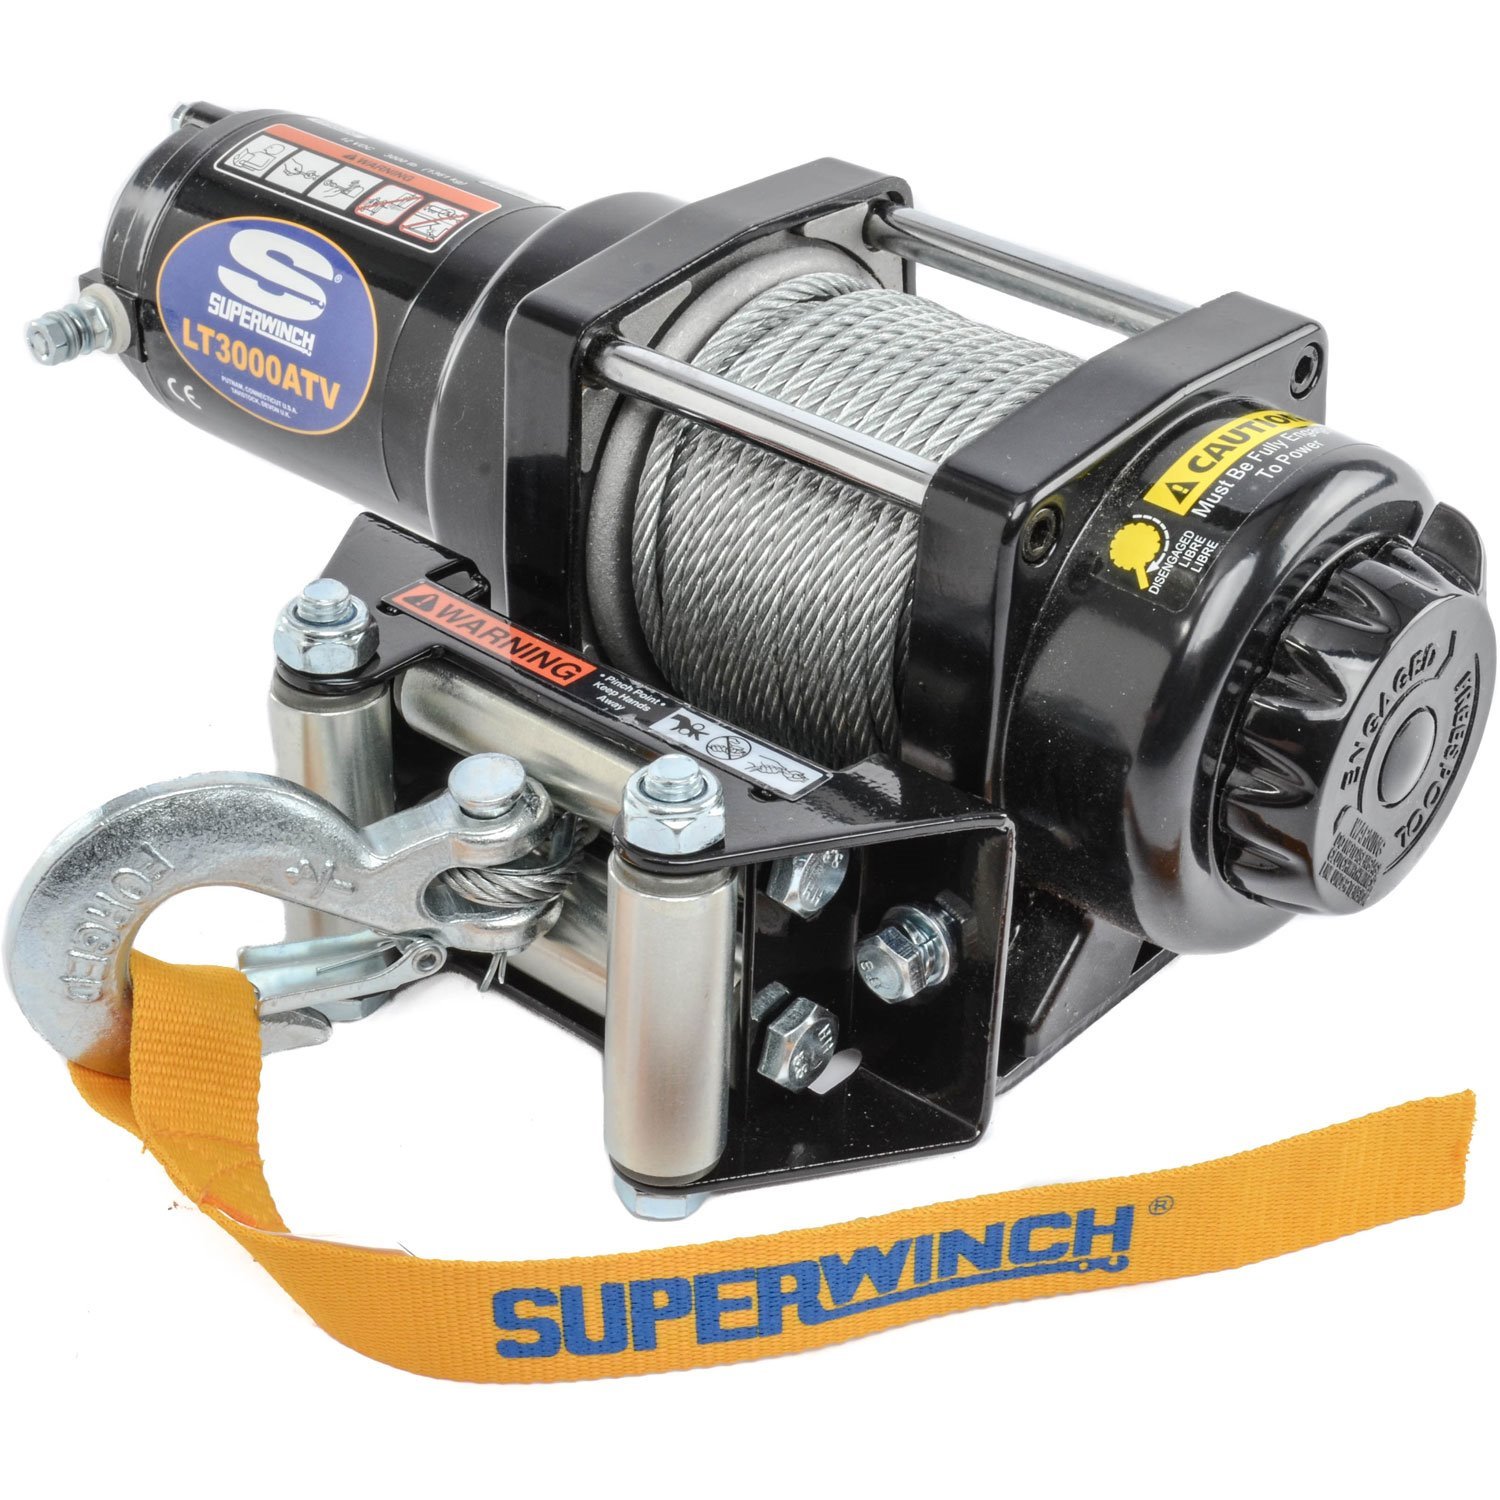 LT3000 ATV Winch 1.2 HP Motor Rated Line Pull 3000-lbs.